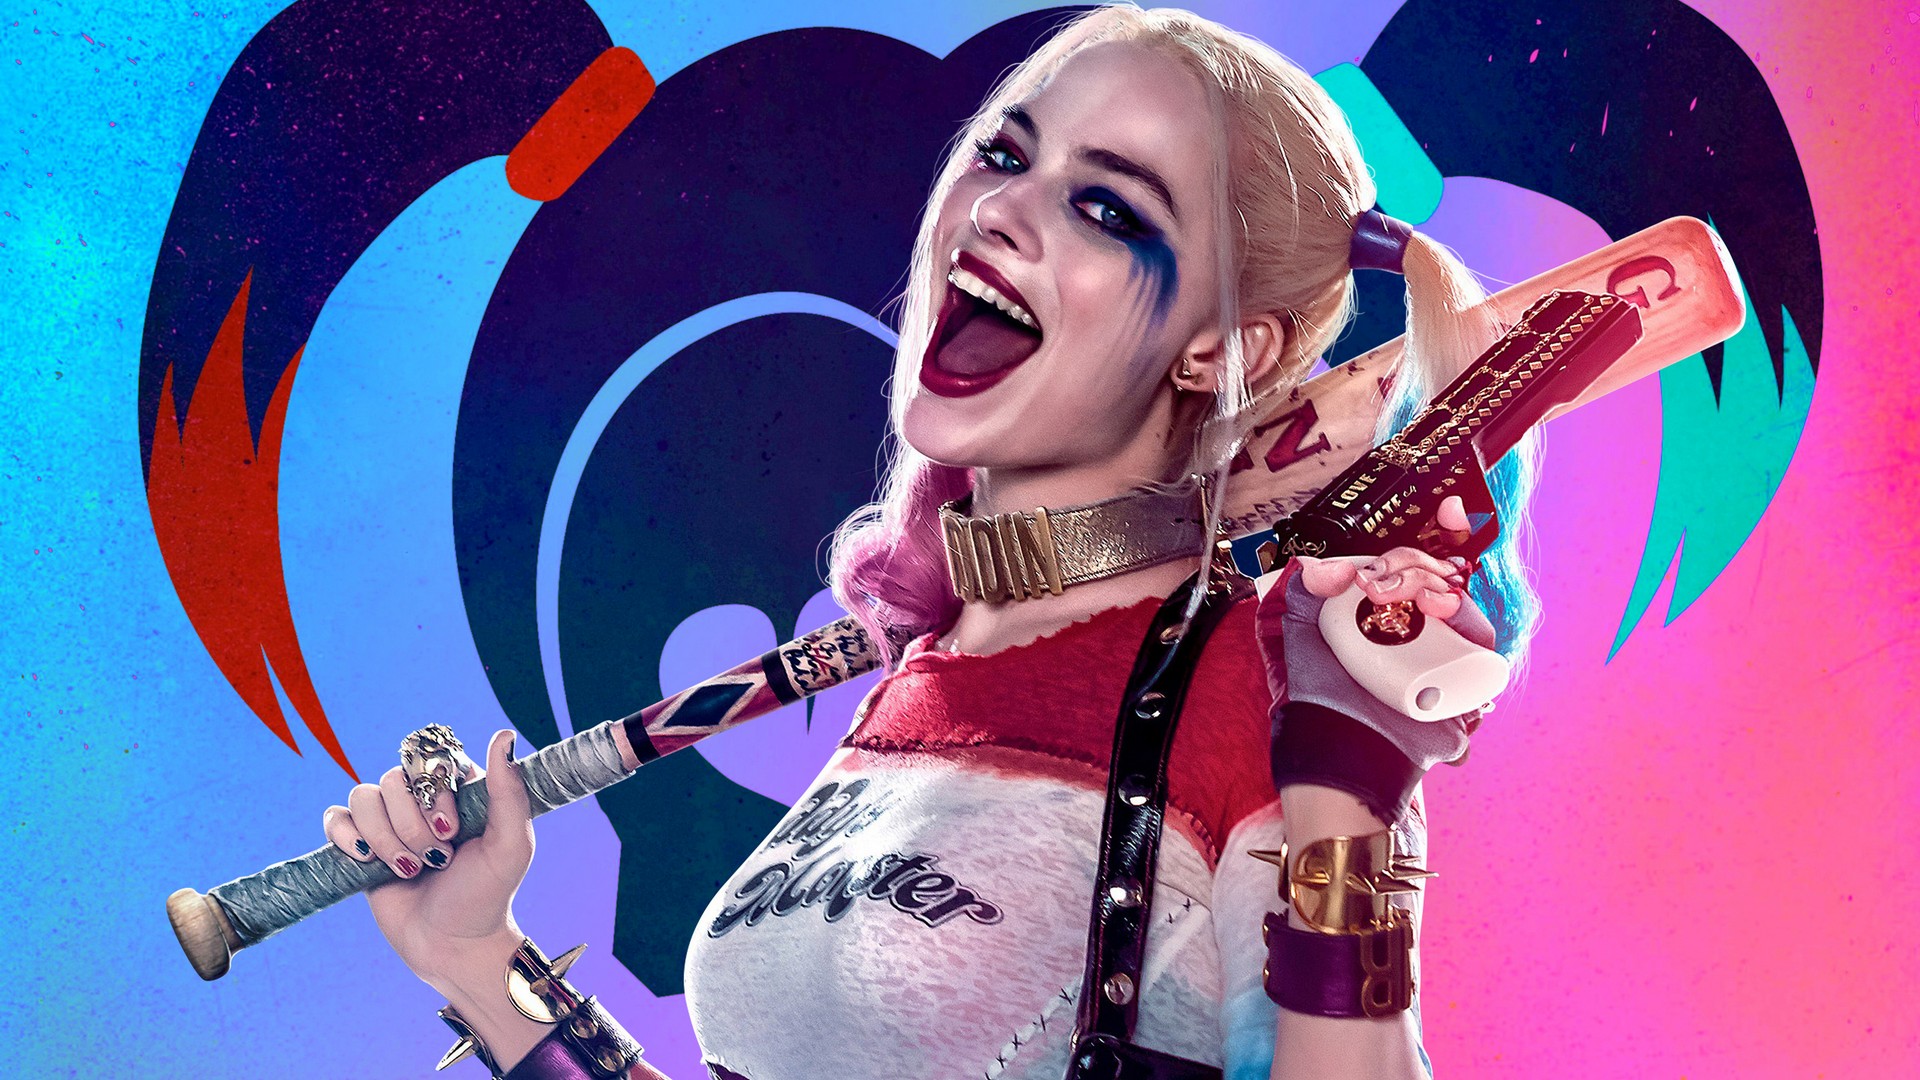 Harley Quinn Wallpaper For Desktop with resolution 1920X1080 pixel. You can use this wallpaper as background for your desktop Computer Screensavers, Android or iPhone smartphones